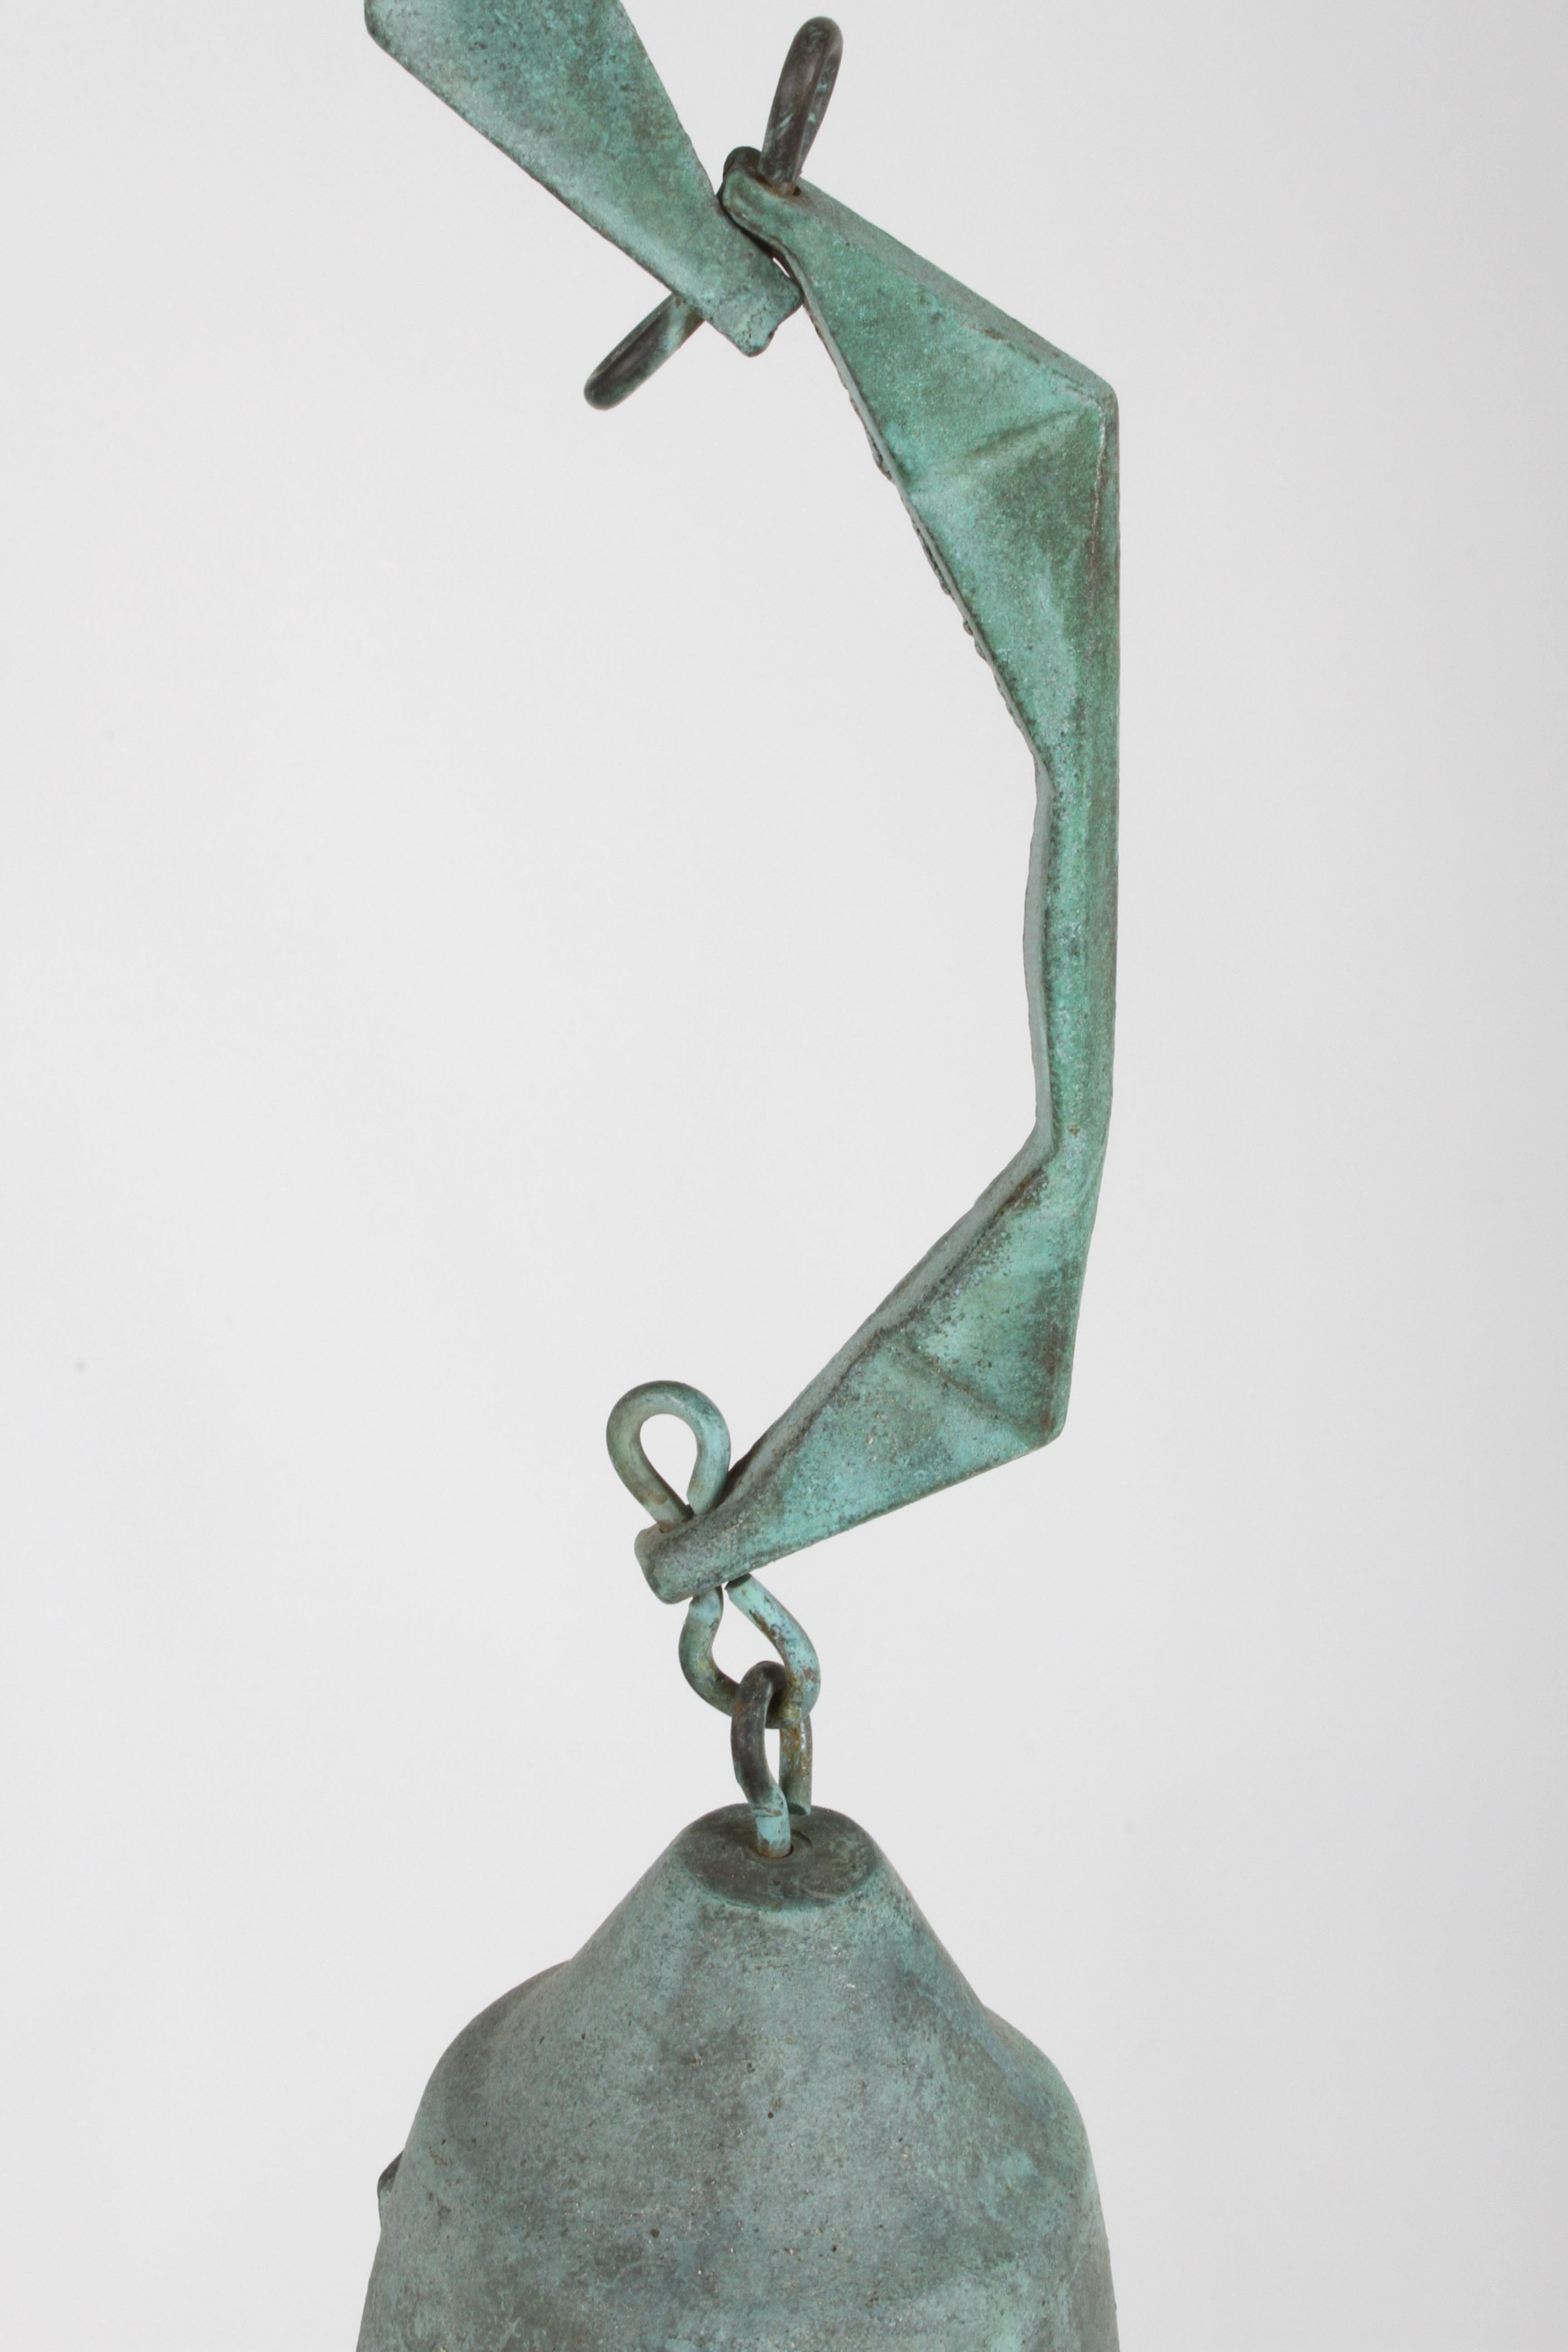 Mid-20th Century Early Bronze Sculptural Wind Chime or Bell by Paolo Soleri, Mid-Century Modern